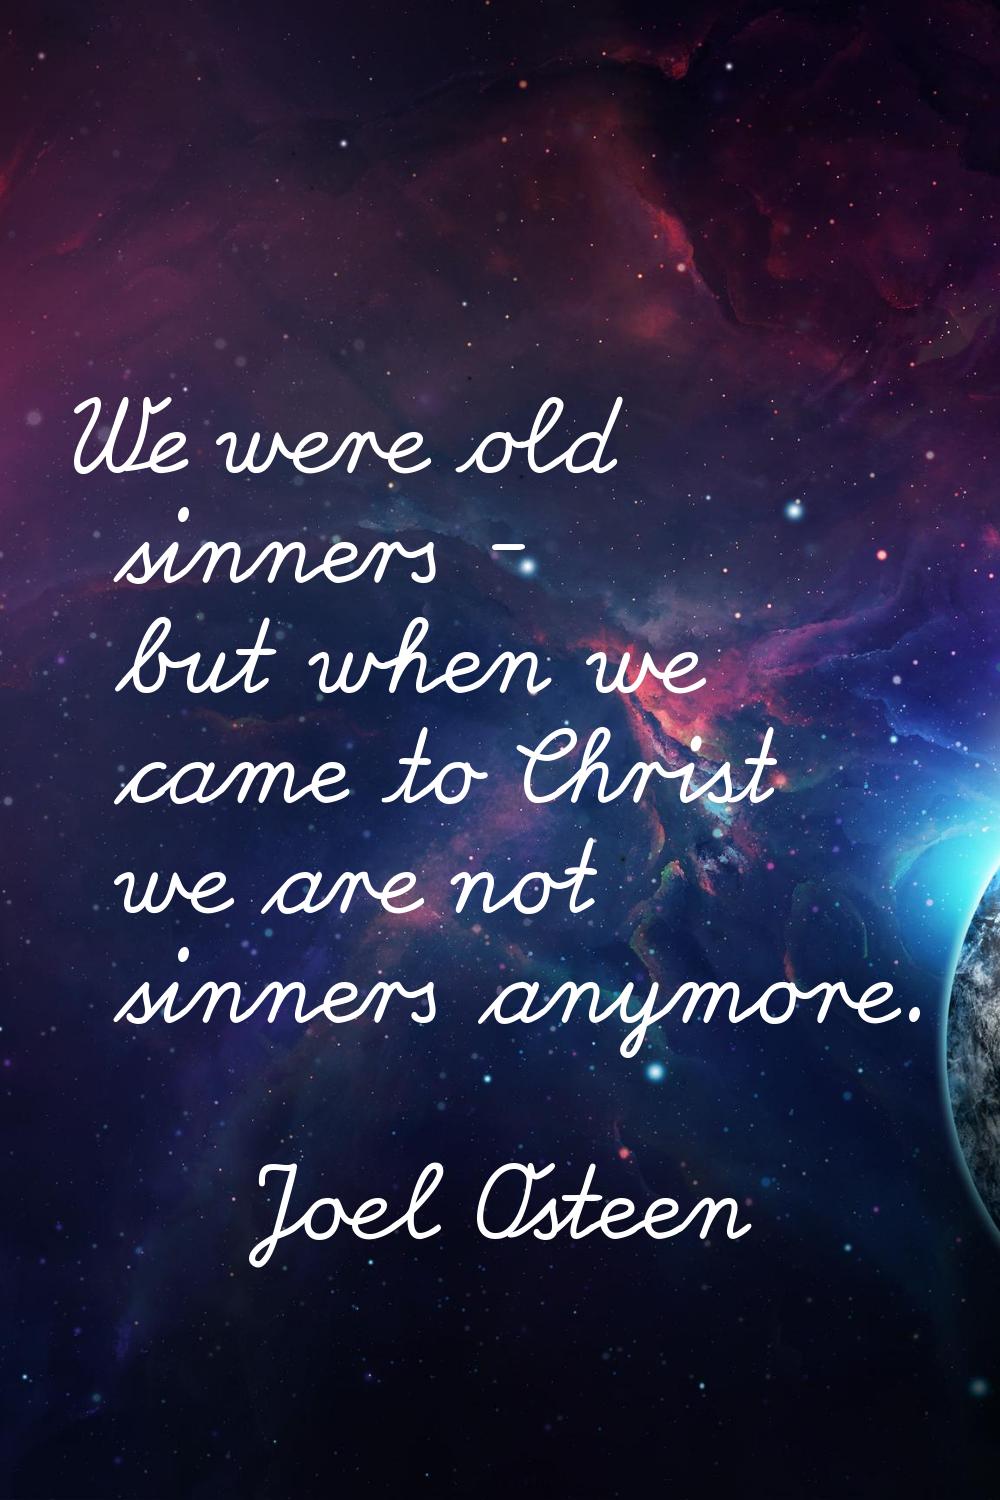 We were old sinners - but when we came to Christ we are not sinners anymore.